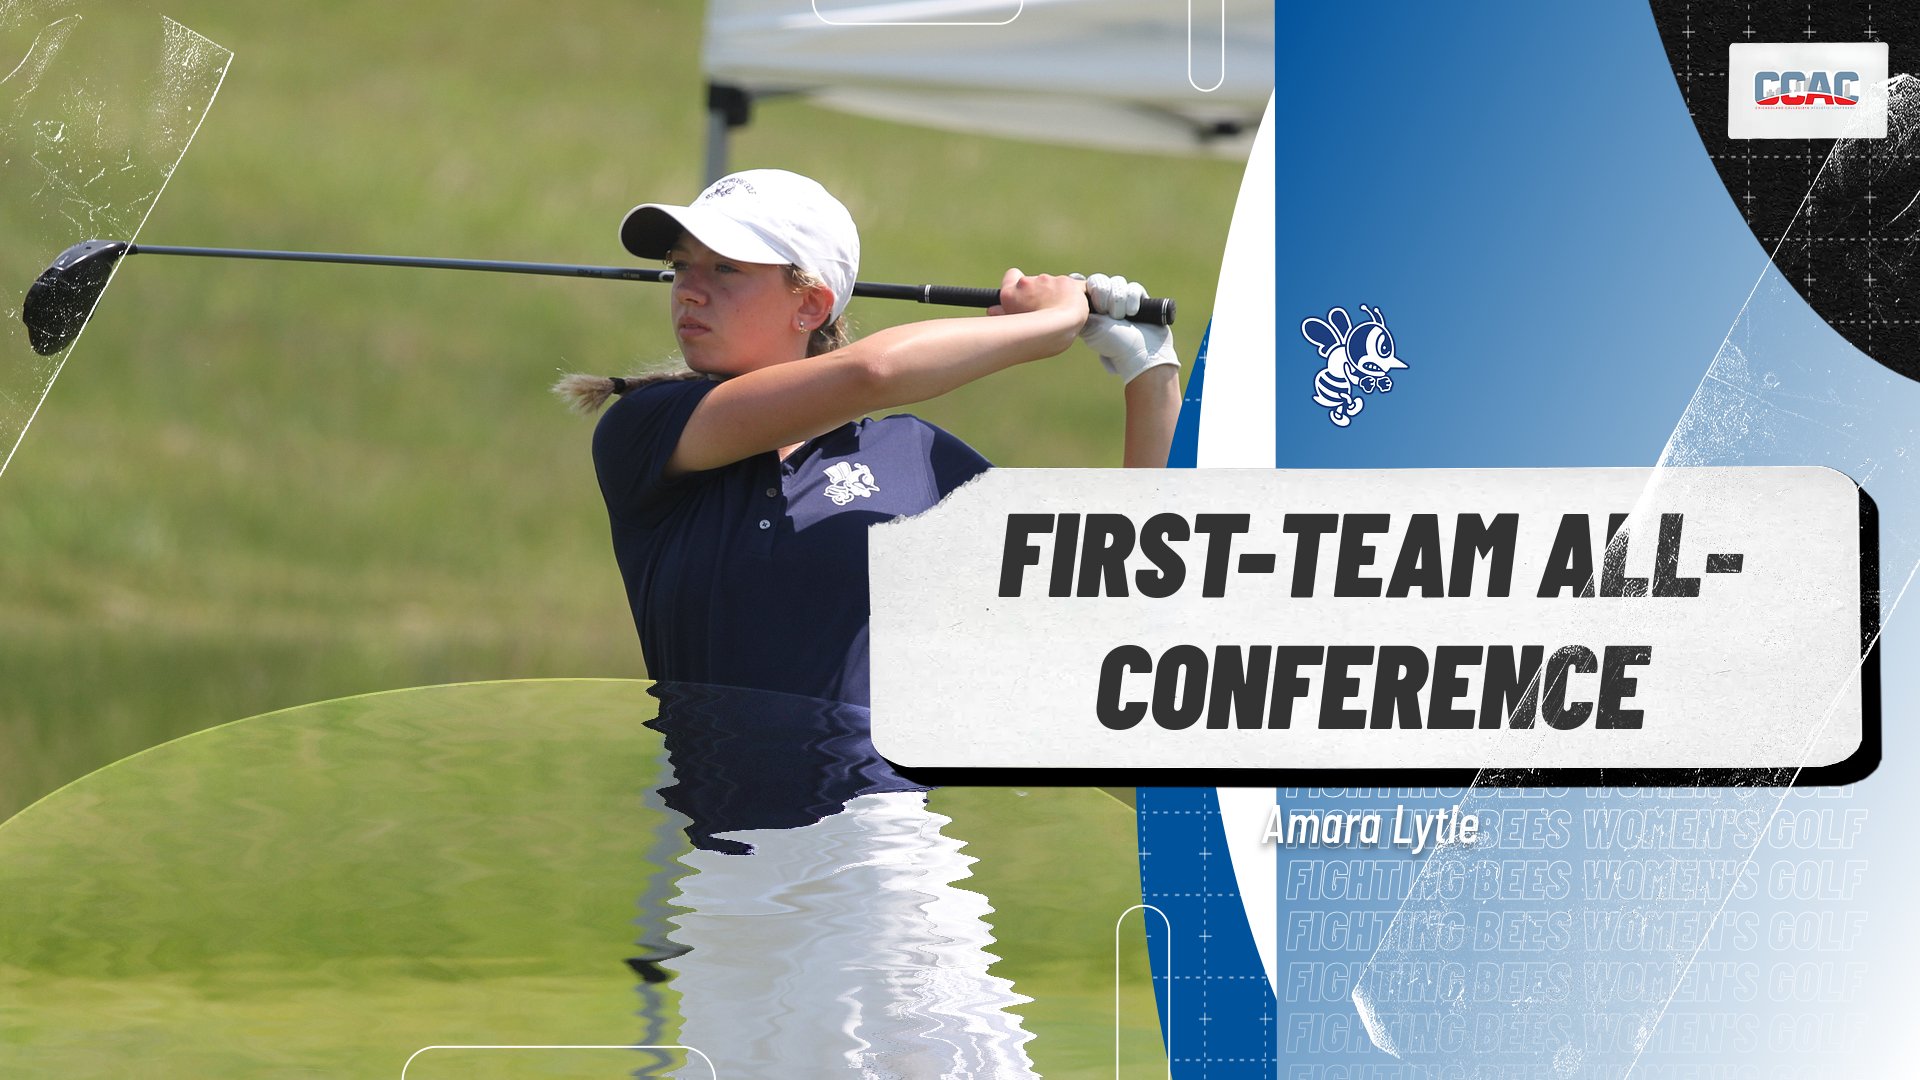 Lytle adds to accolades with another All-Conference selection